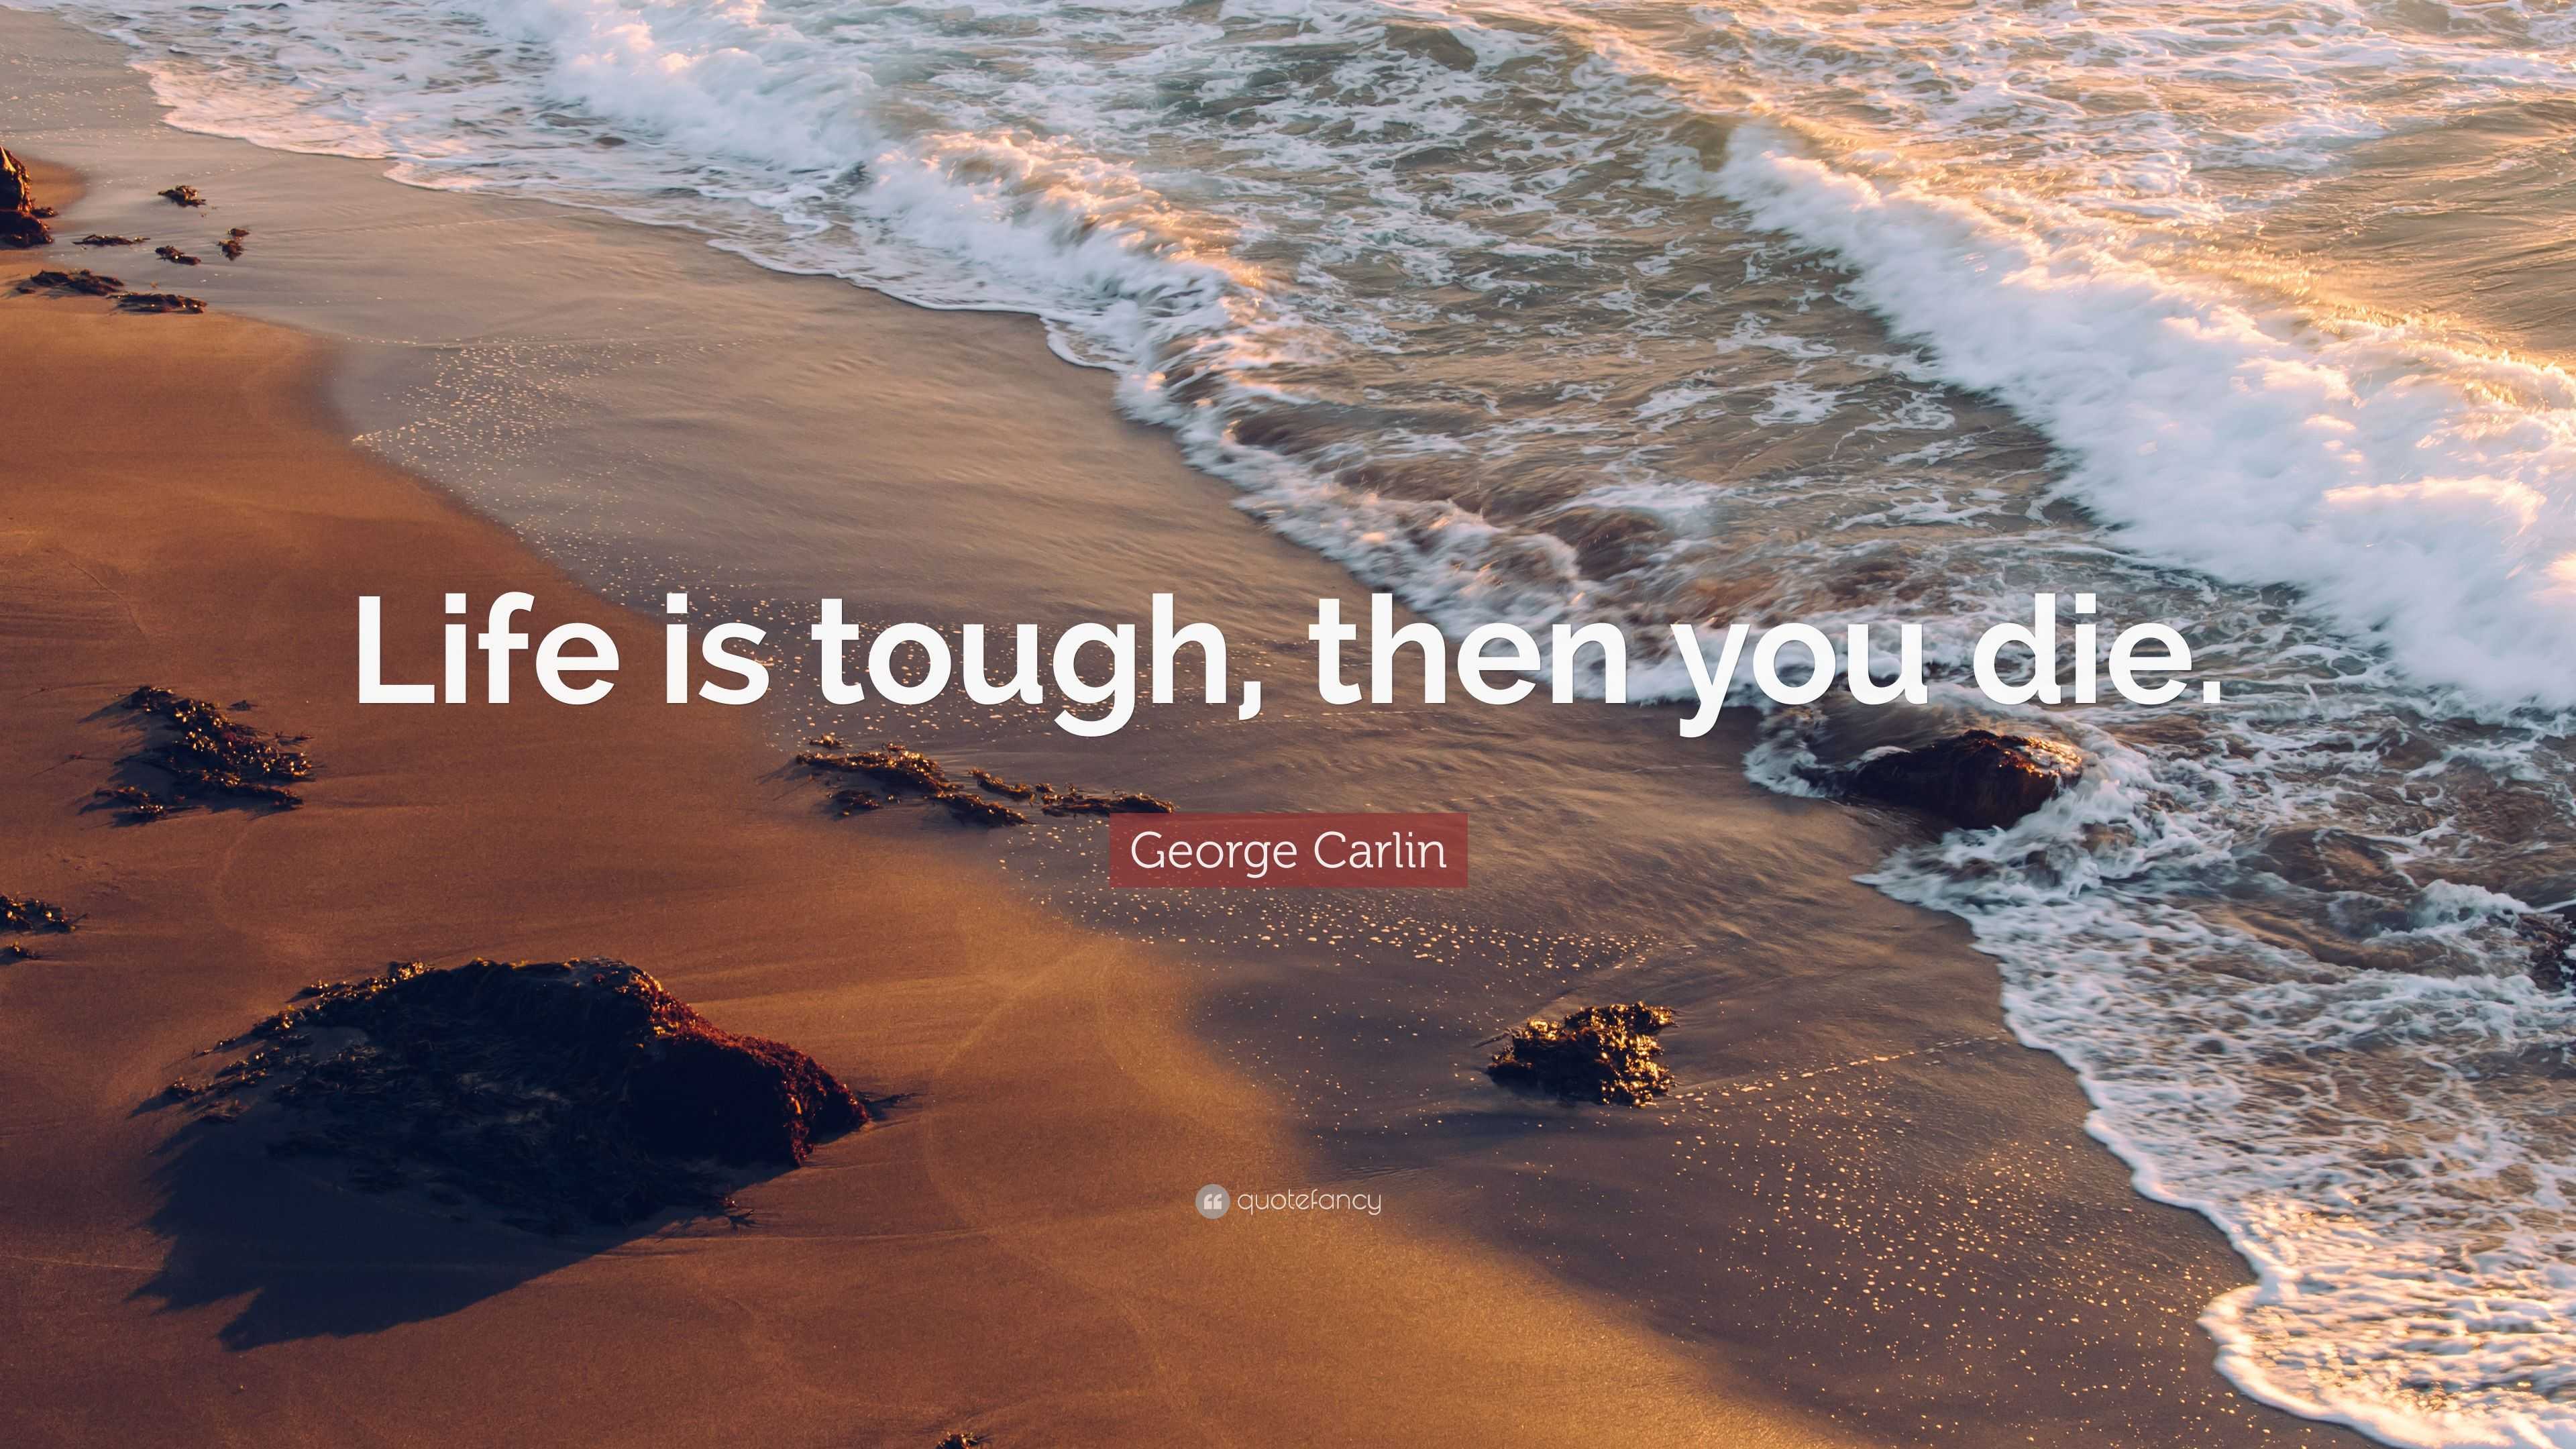 George Carlin Quote “Life is tough then you ”